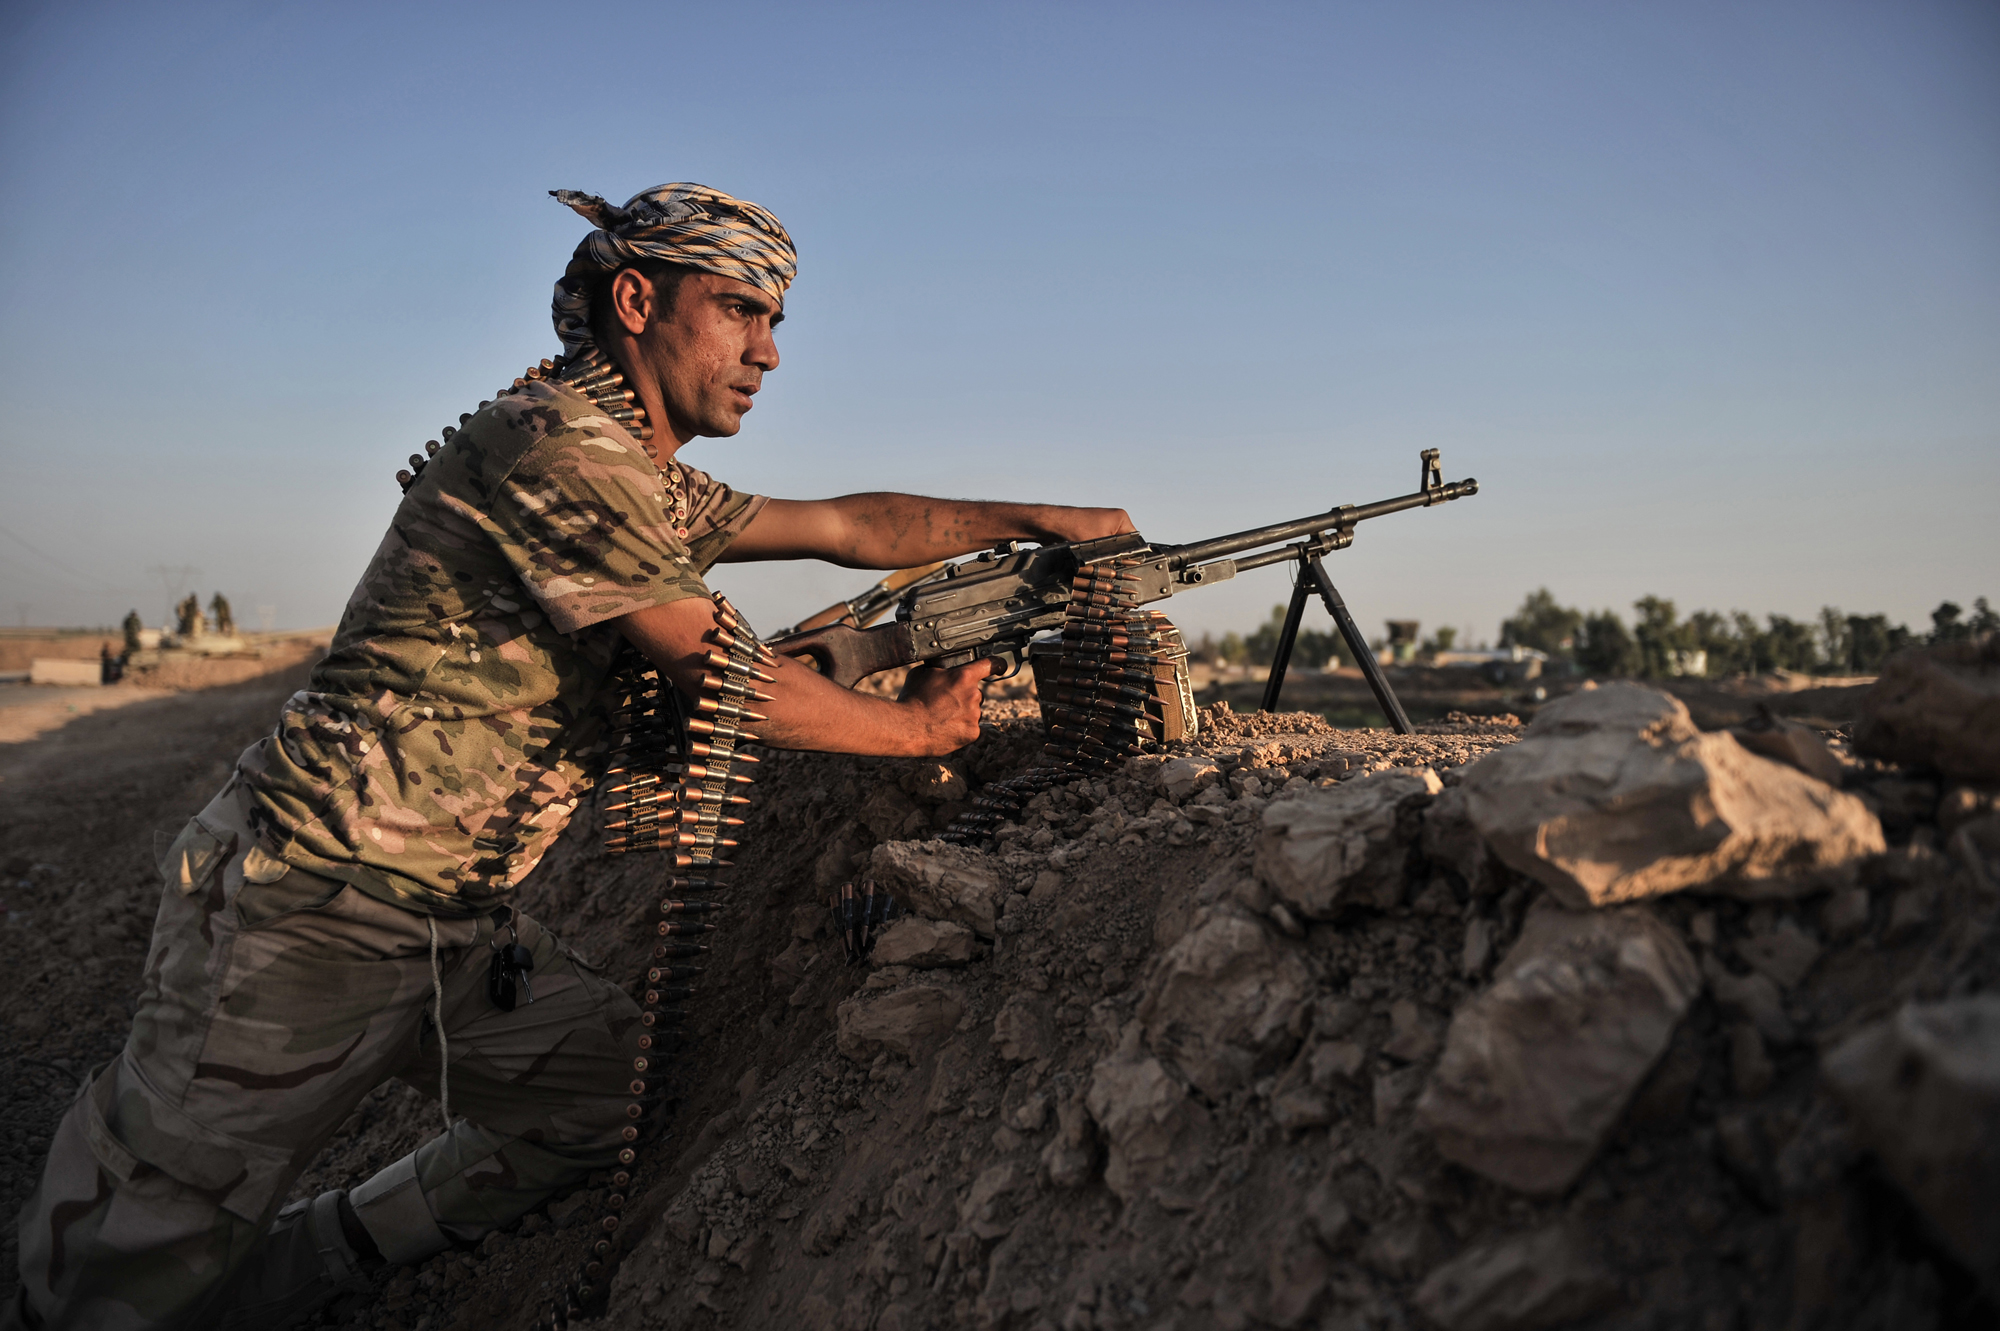 Kurdish Peshmerga forces stand guard in the oil-rich city of Kirkuk against Islamic State of Iraq and Syria (ISIS) on June 17, 2014. (Onur Coban—Anadolu Agency/Getty Images)